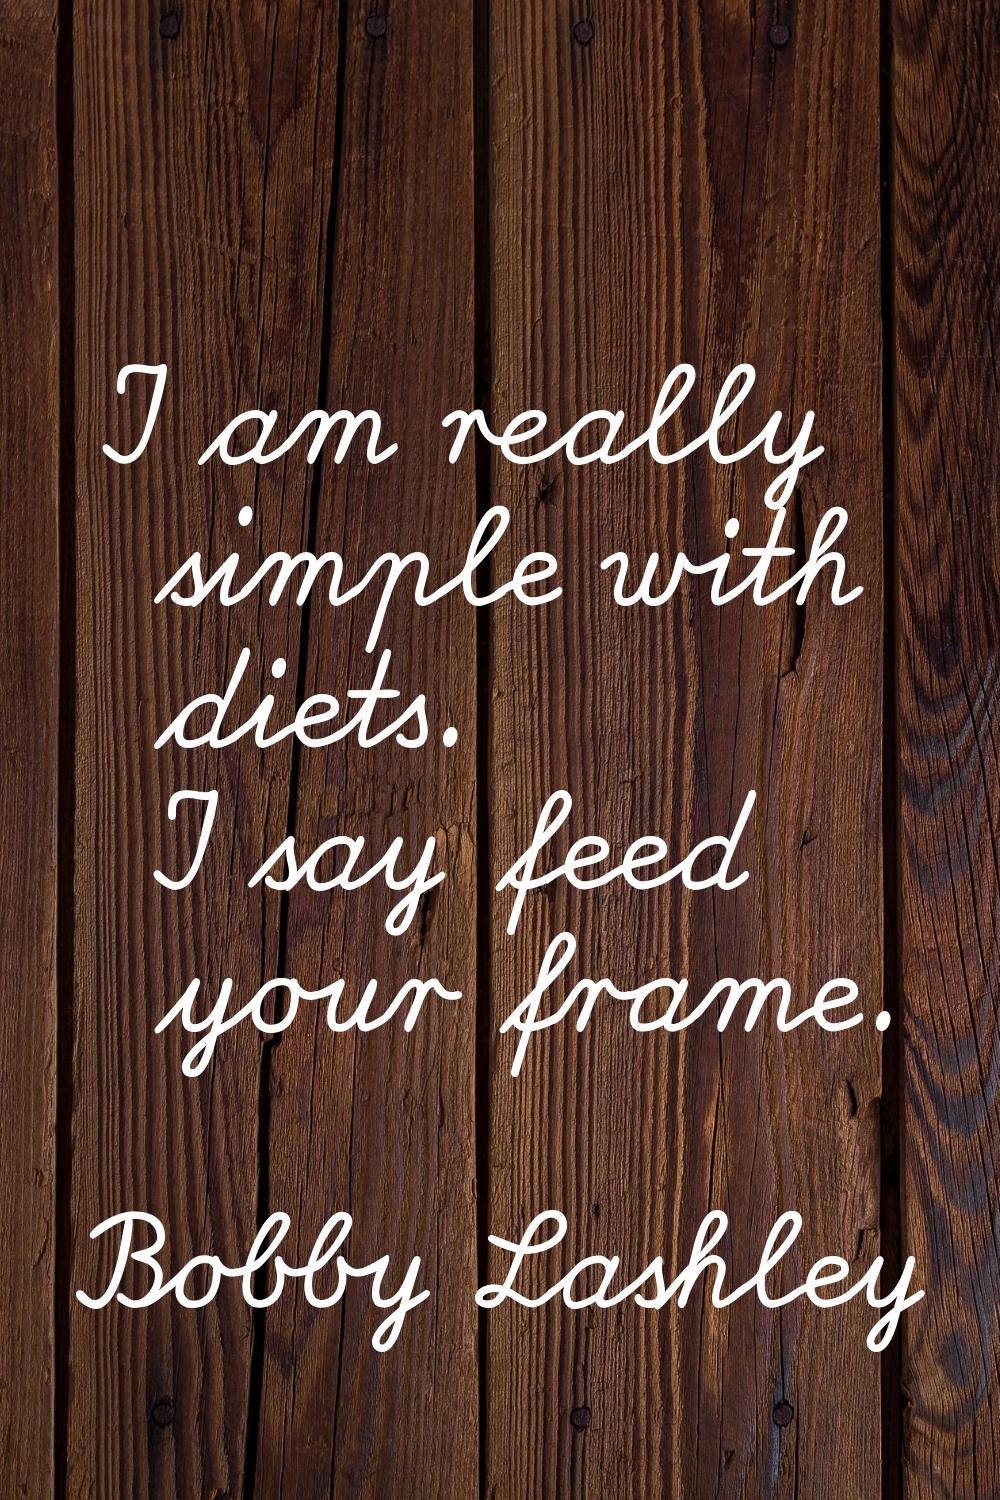 I am really simple with diets. I say feed your frame.